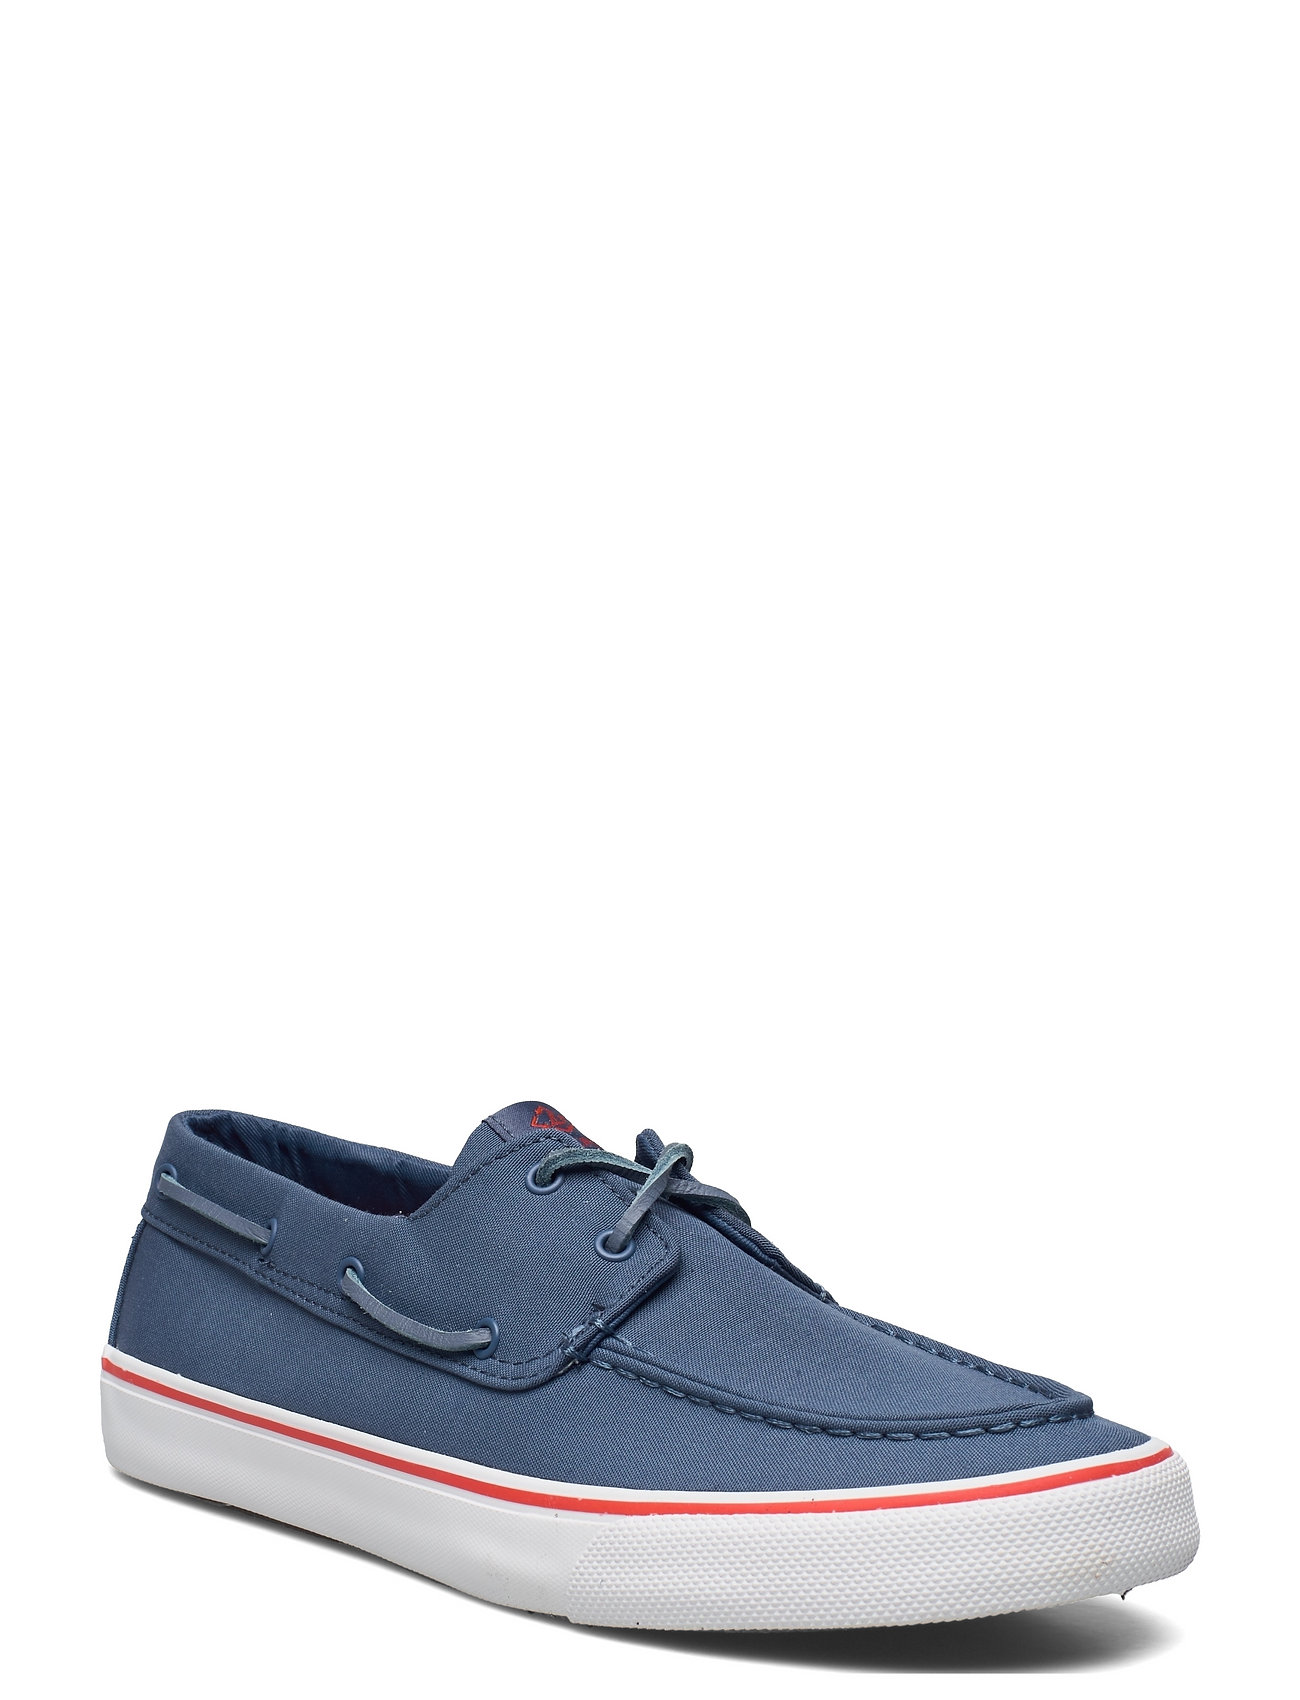 Sperry Bahama Ii Seacycled (Grey), (36.05 €) | Large selection of outlet-styles